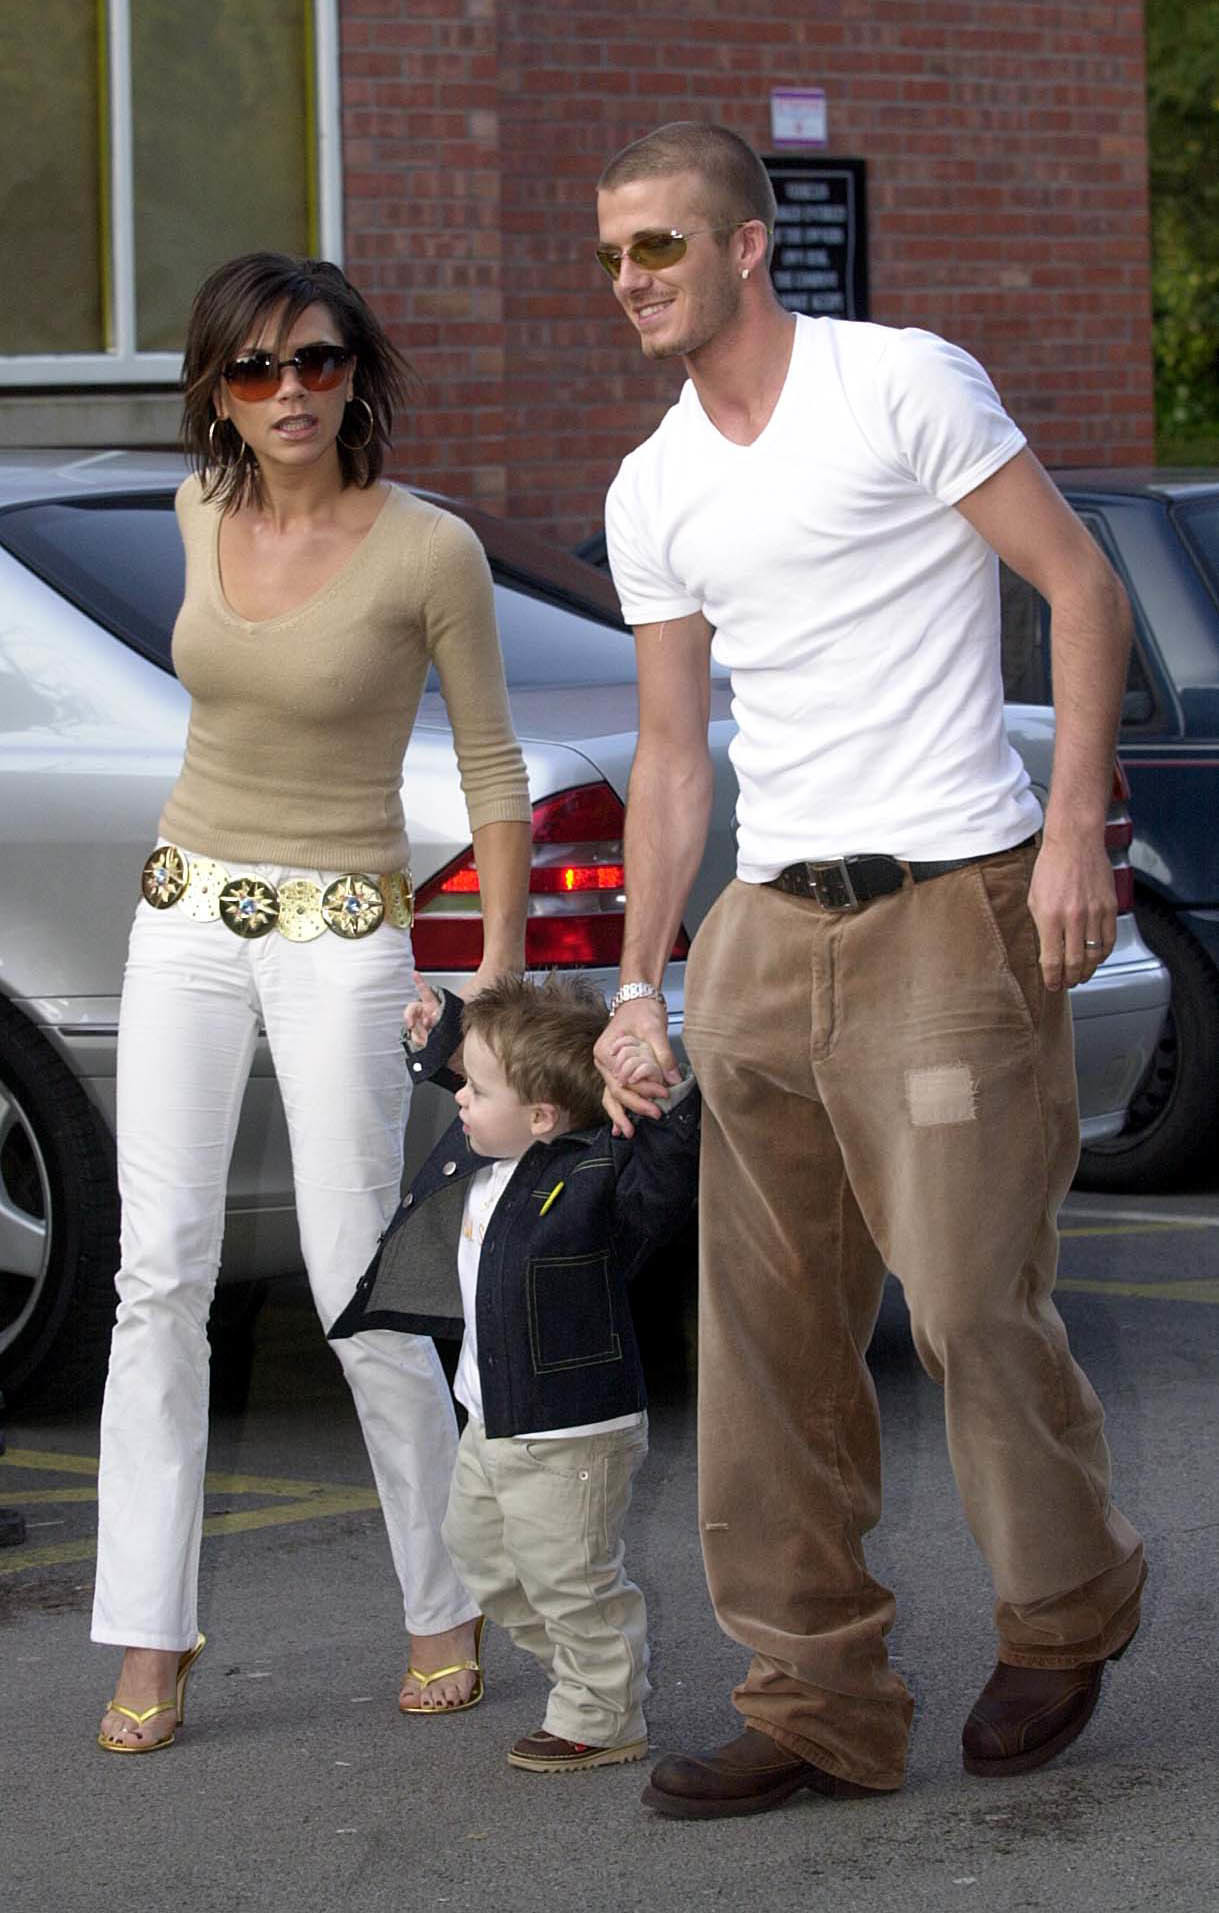 Manchester United footballer David Beckham and his Spice Girl wife Victoria Beckham throw a second birthday party for their son Brooklyn, at the Wacky Warehouse, County Hotel, in Alderley Edge, Cheshire